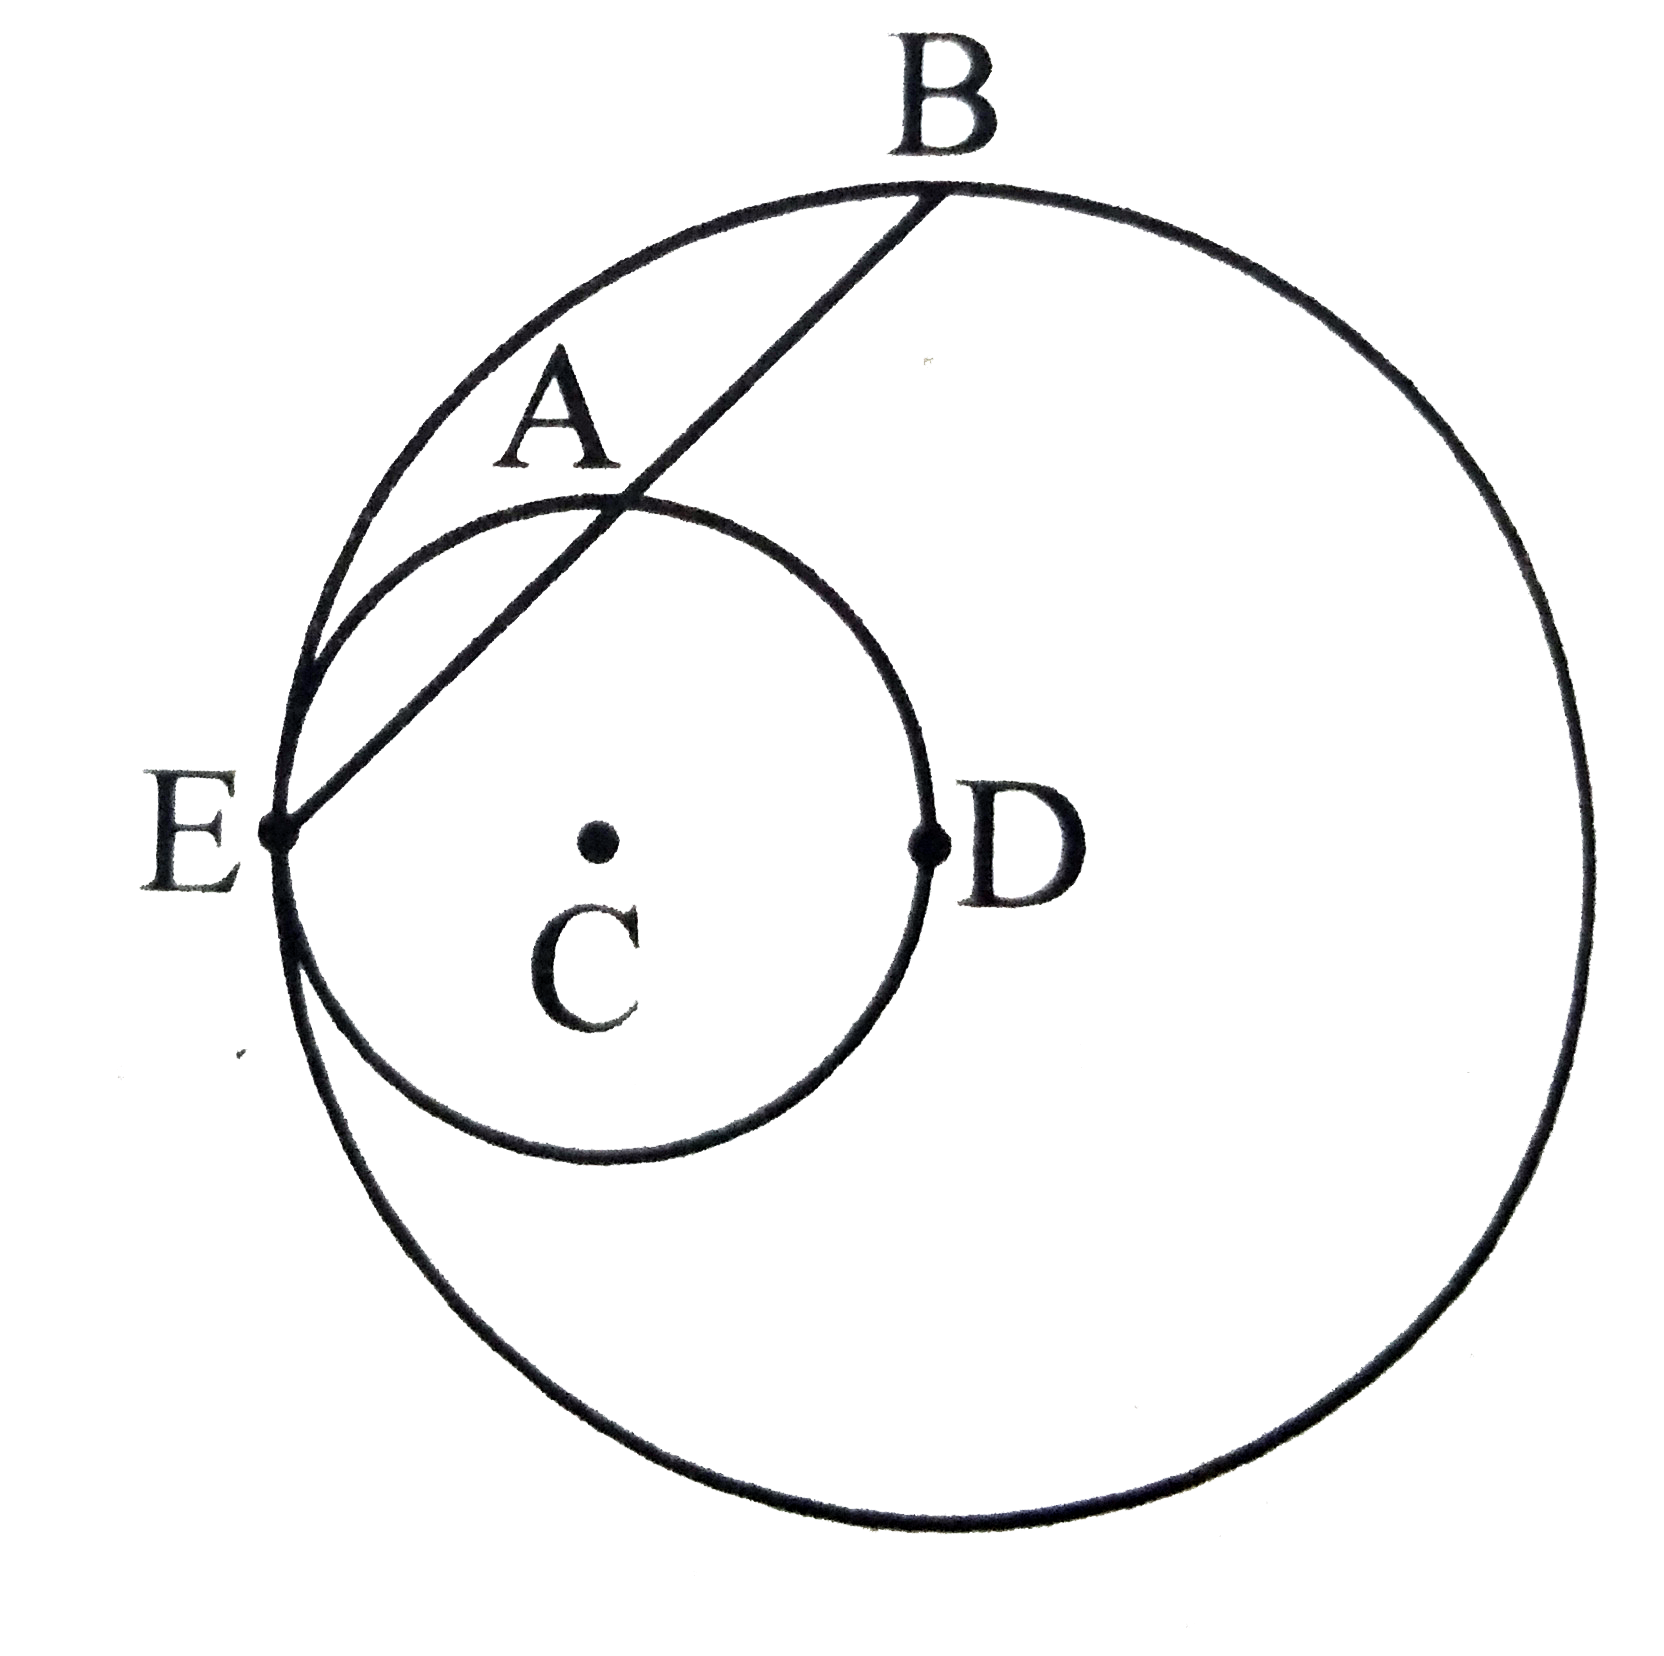 In the adjoining figure , circles with centres C and D touch internally at point E. D lies on the inner circle. Chord EB of the other circle intersects innet circle at point A. Prove that, seg EAcongseg AB.